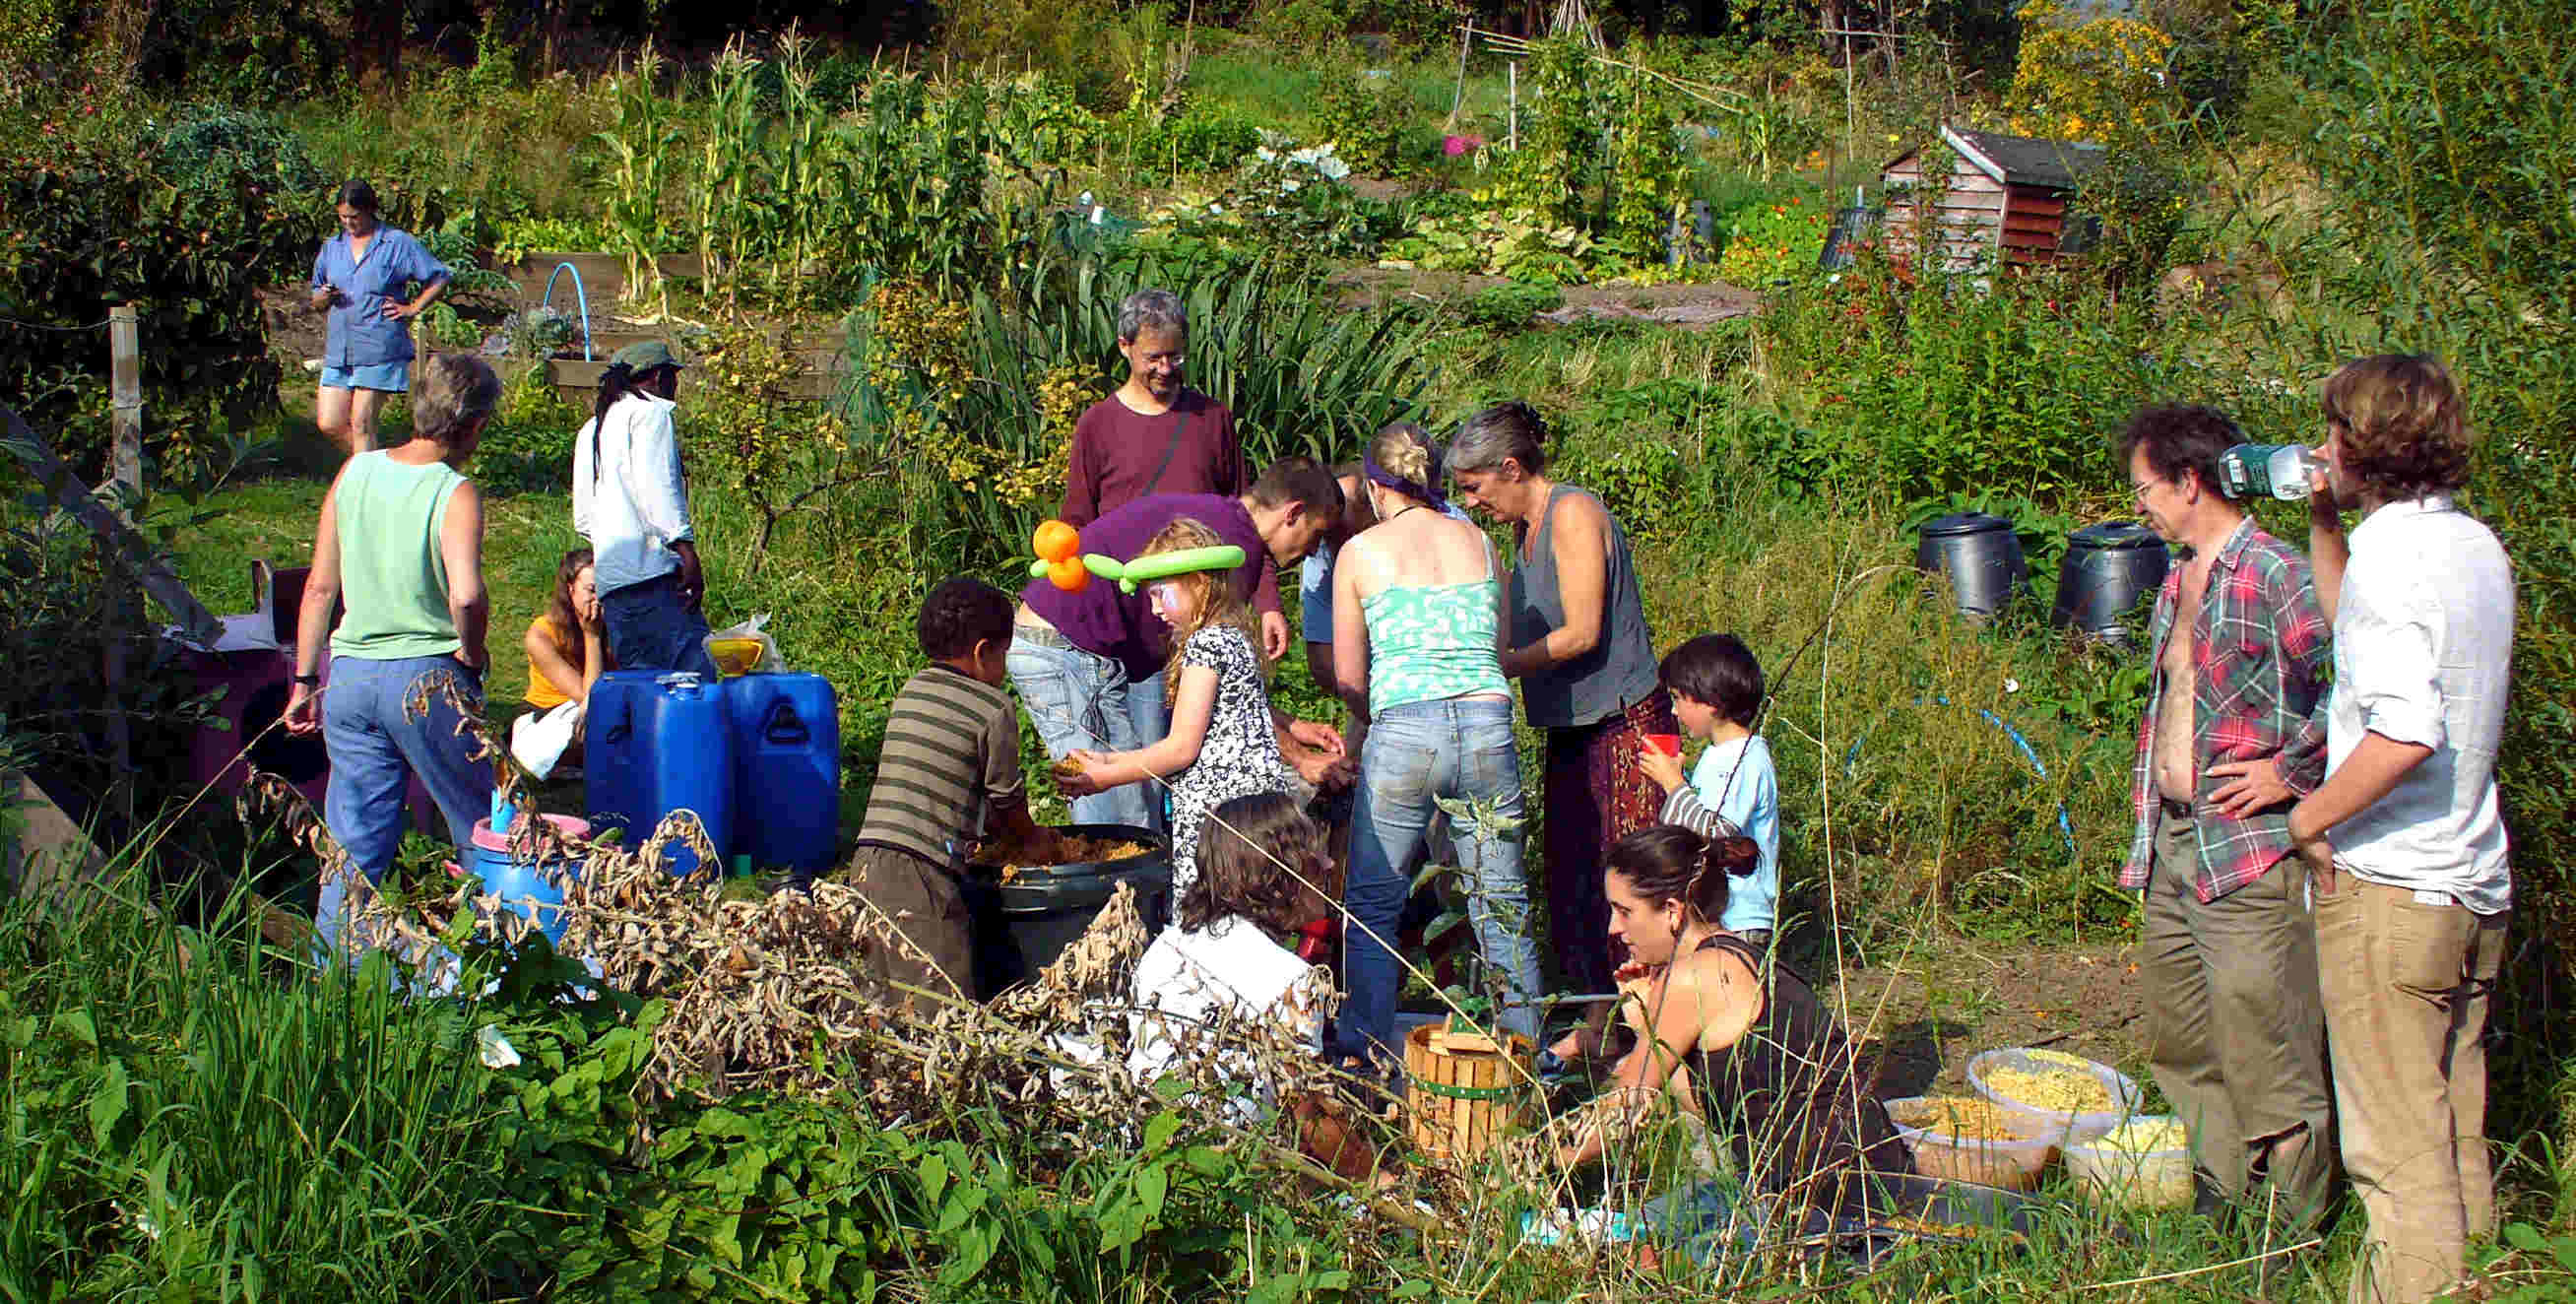 Group on allotment